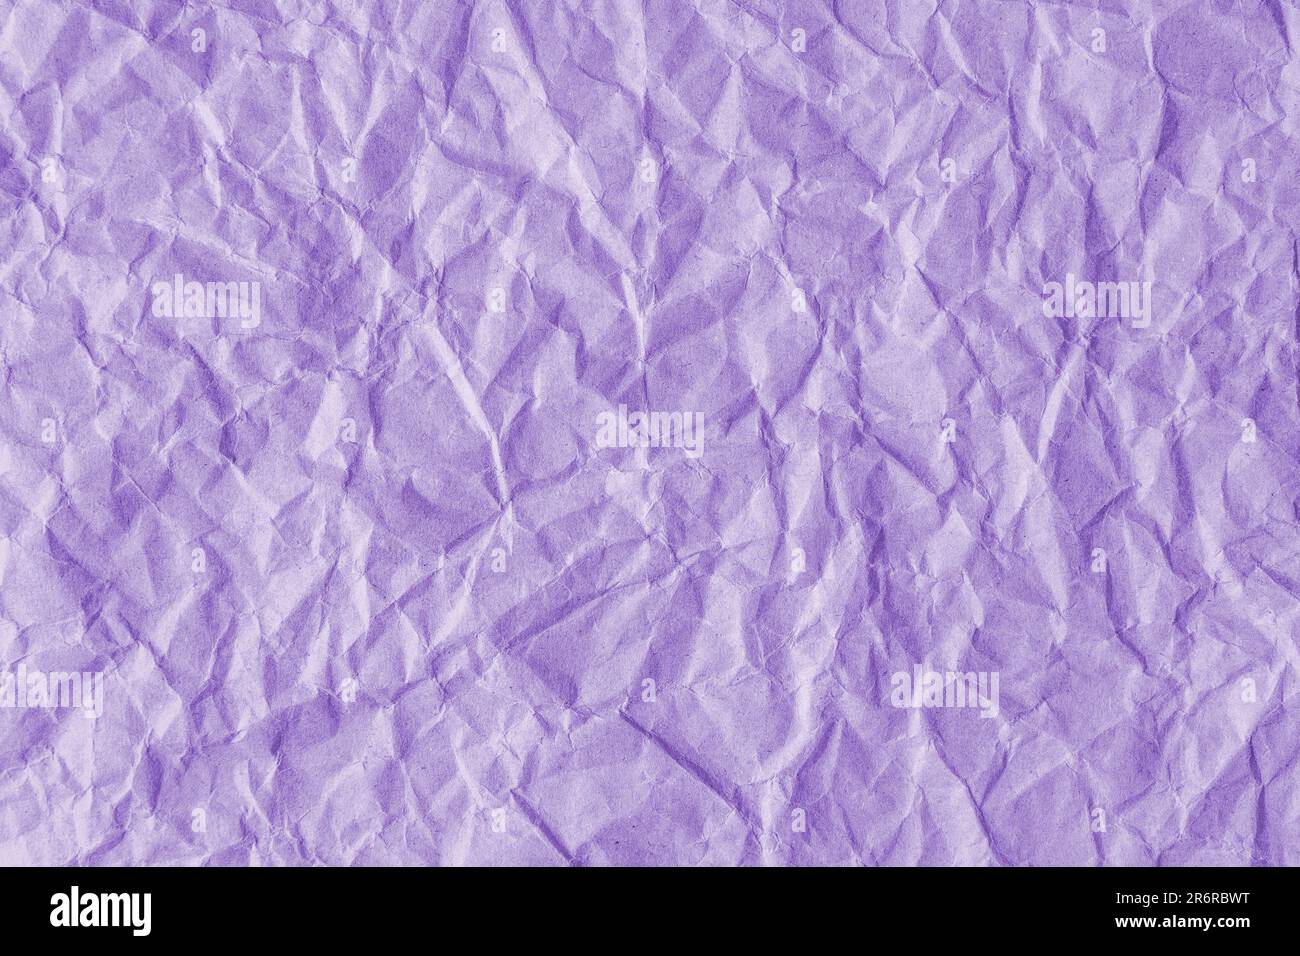 Old Purple Paper Texture Vintage Purple Paper Background Stock Photo -  Download Image Now - iStock